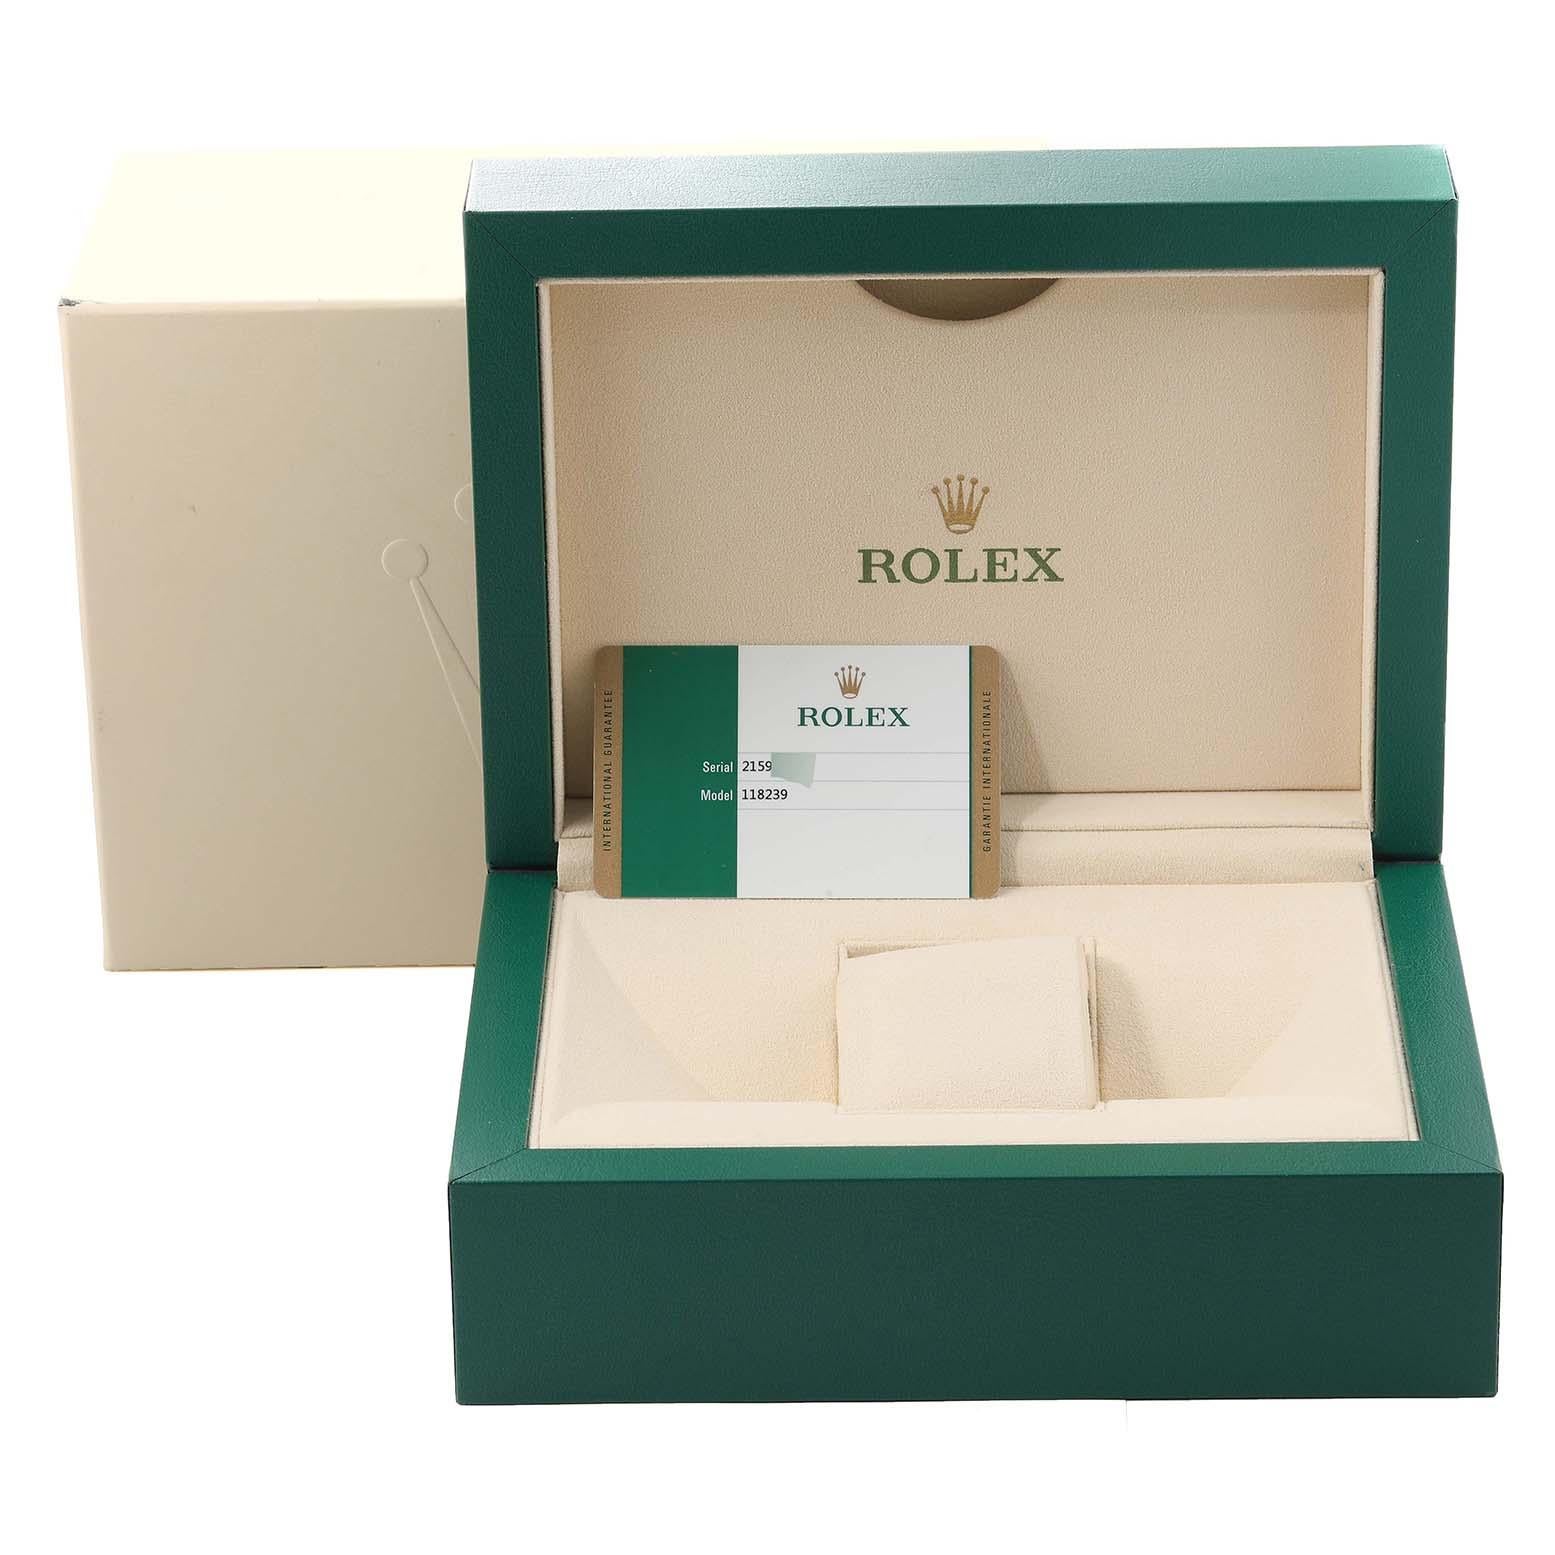 Rolex President Day-Date White Gold Diamond Dial Mens Watch 118239 Box Card 5